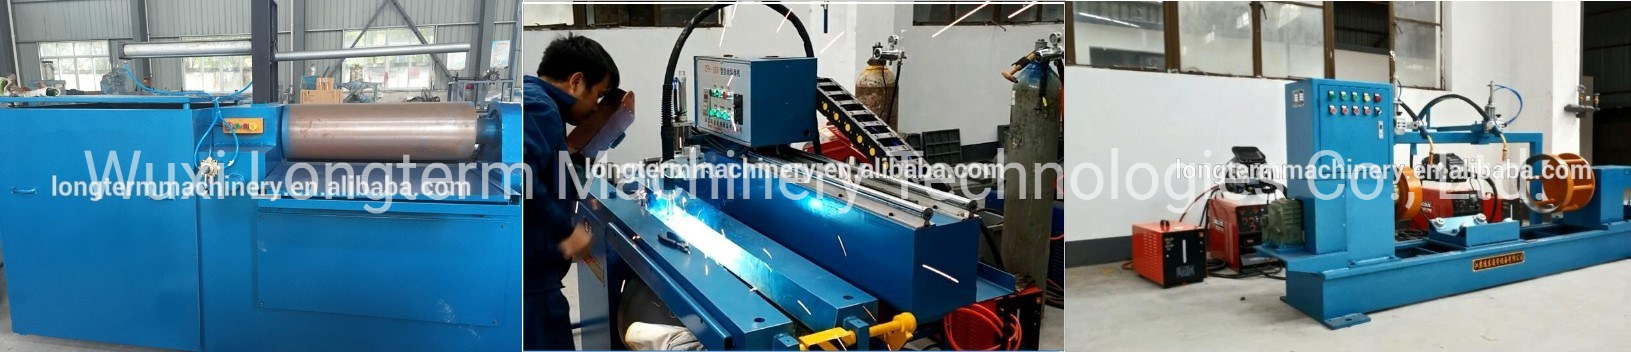 Automatic LPG Cylinder Trimming Machine